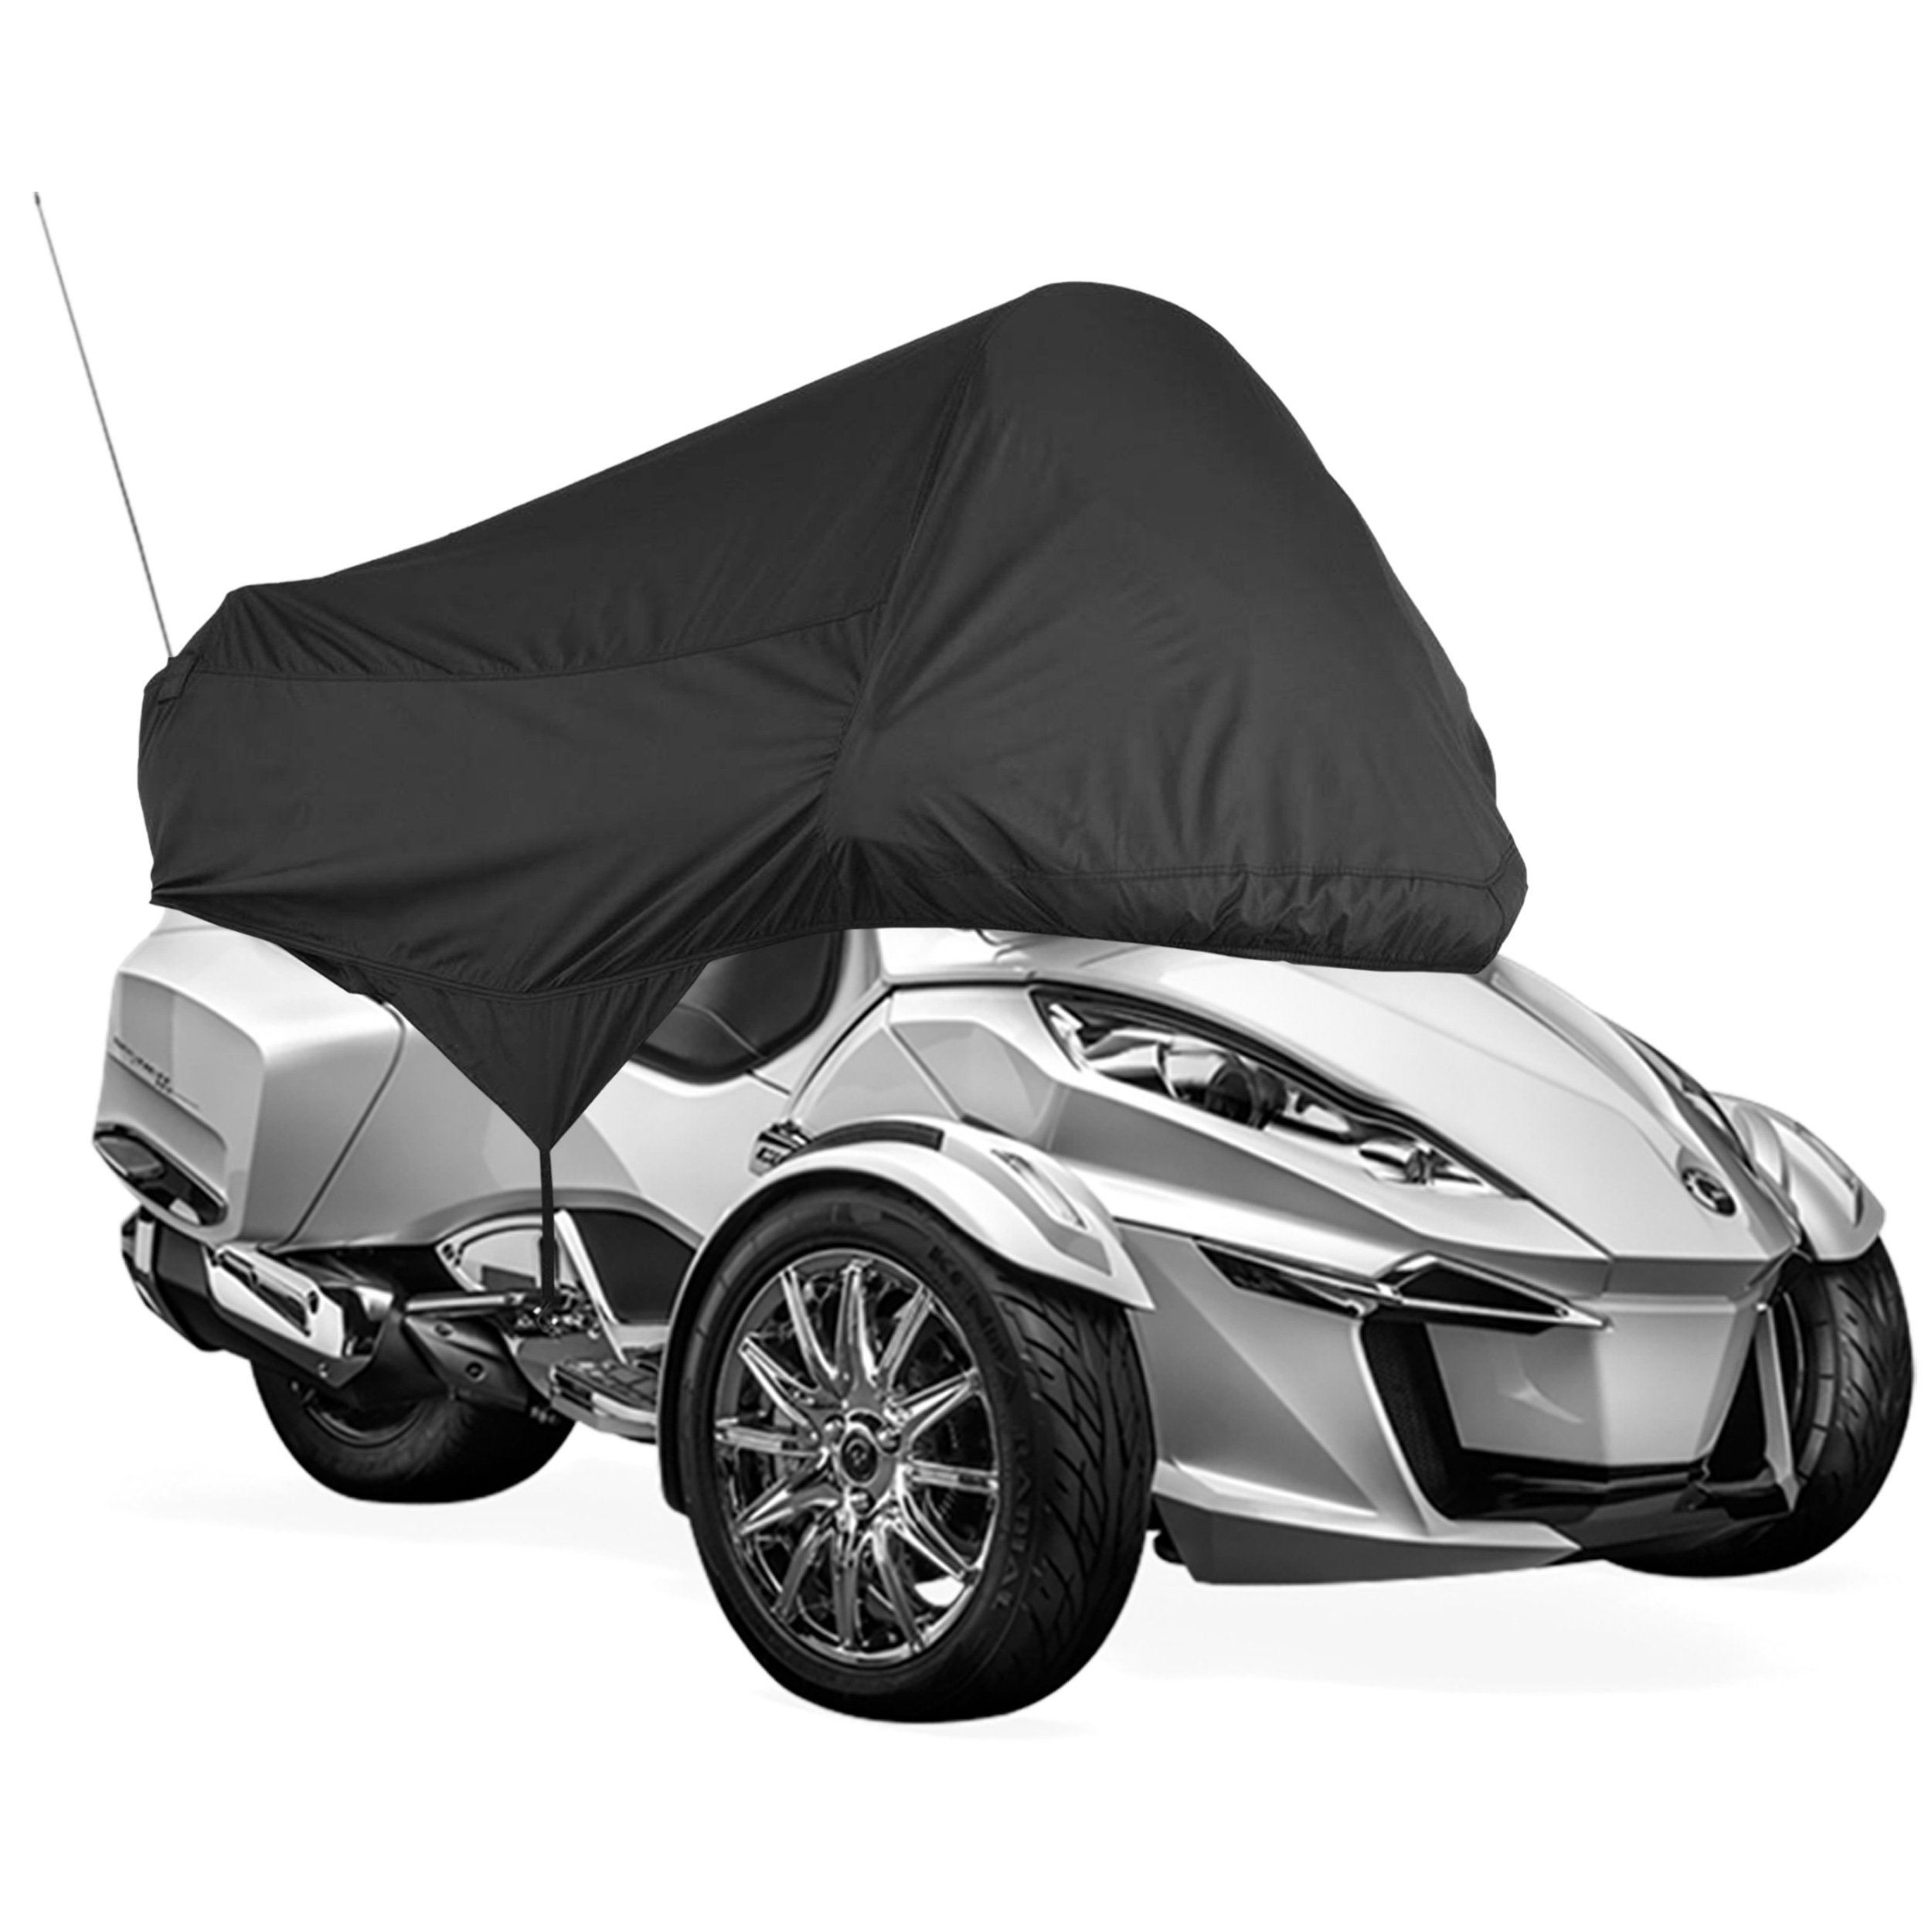 North East Harbor Half Cover Compatible with 2009-2019 Can-Am Spyder RT Audio and Convenience | Waterproof, Weather Resistant Fabric, Black